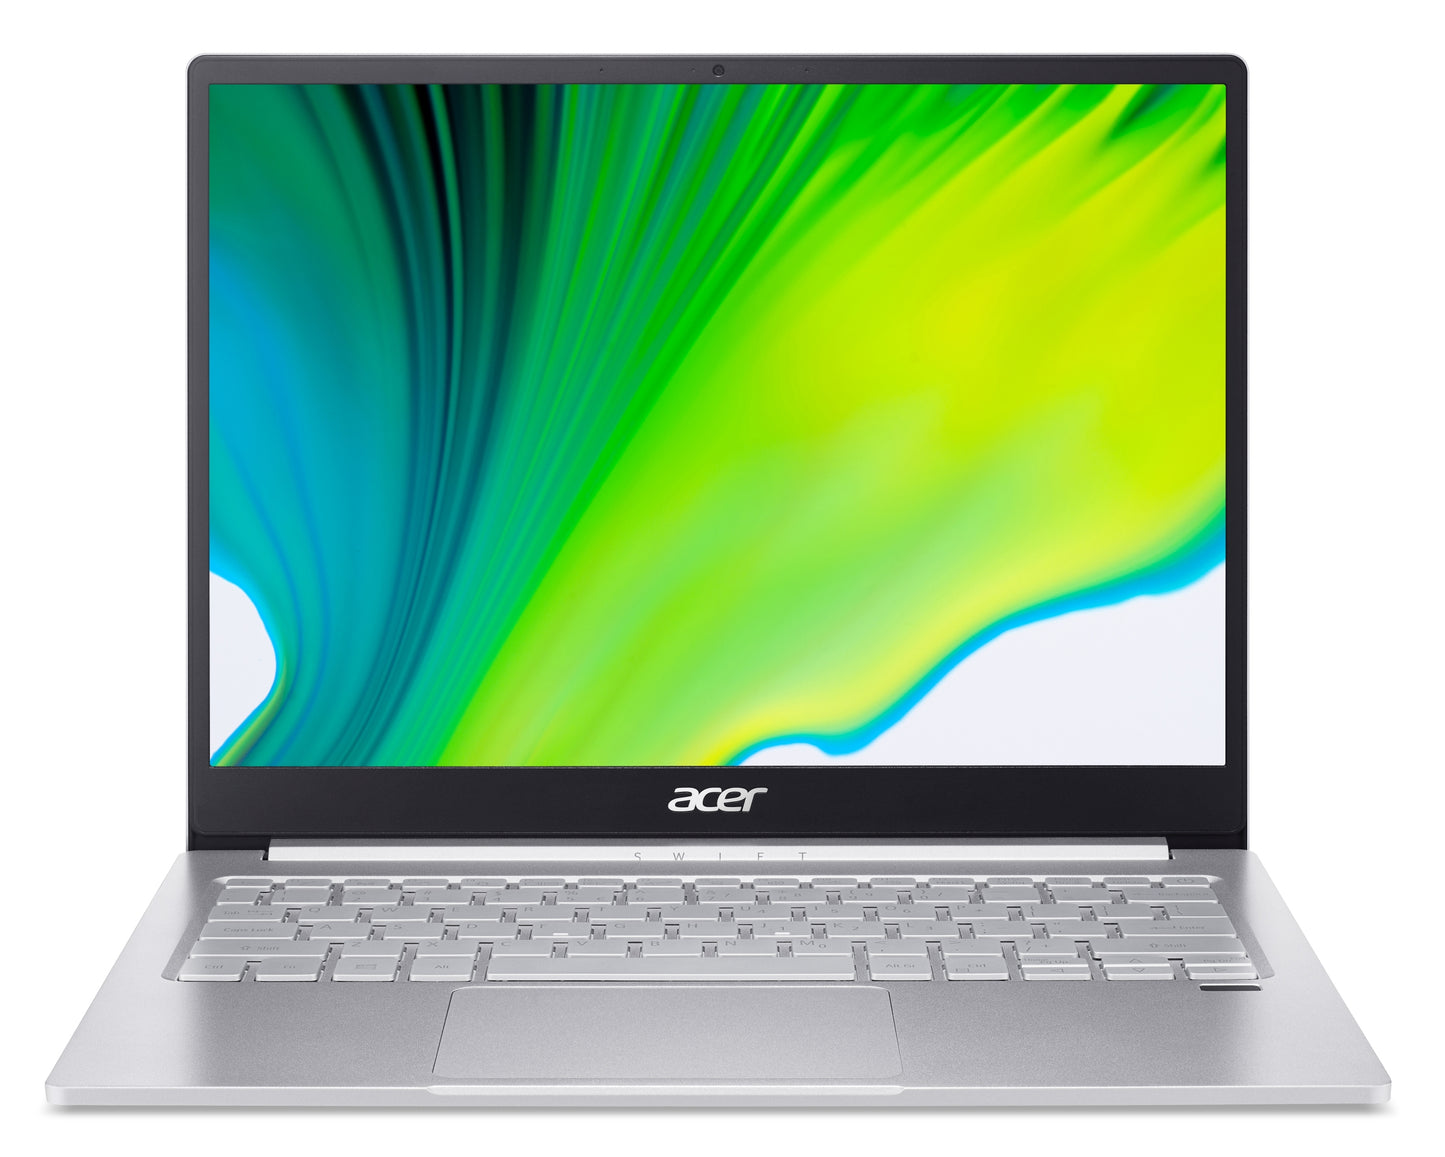 Acer Notebook Swift 3 135 Touch Ci5 1135G7SYST W10H 8GB SSD 512GB 1YW Plata